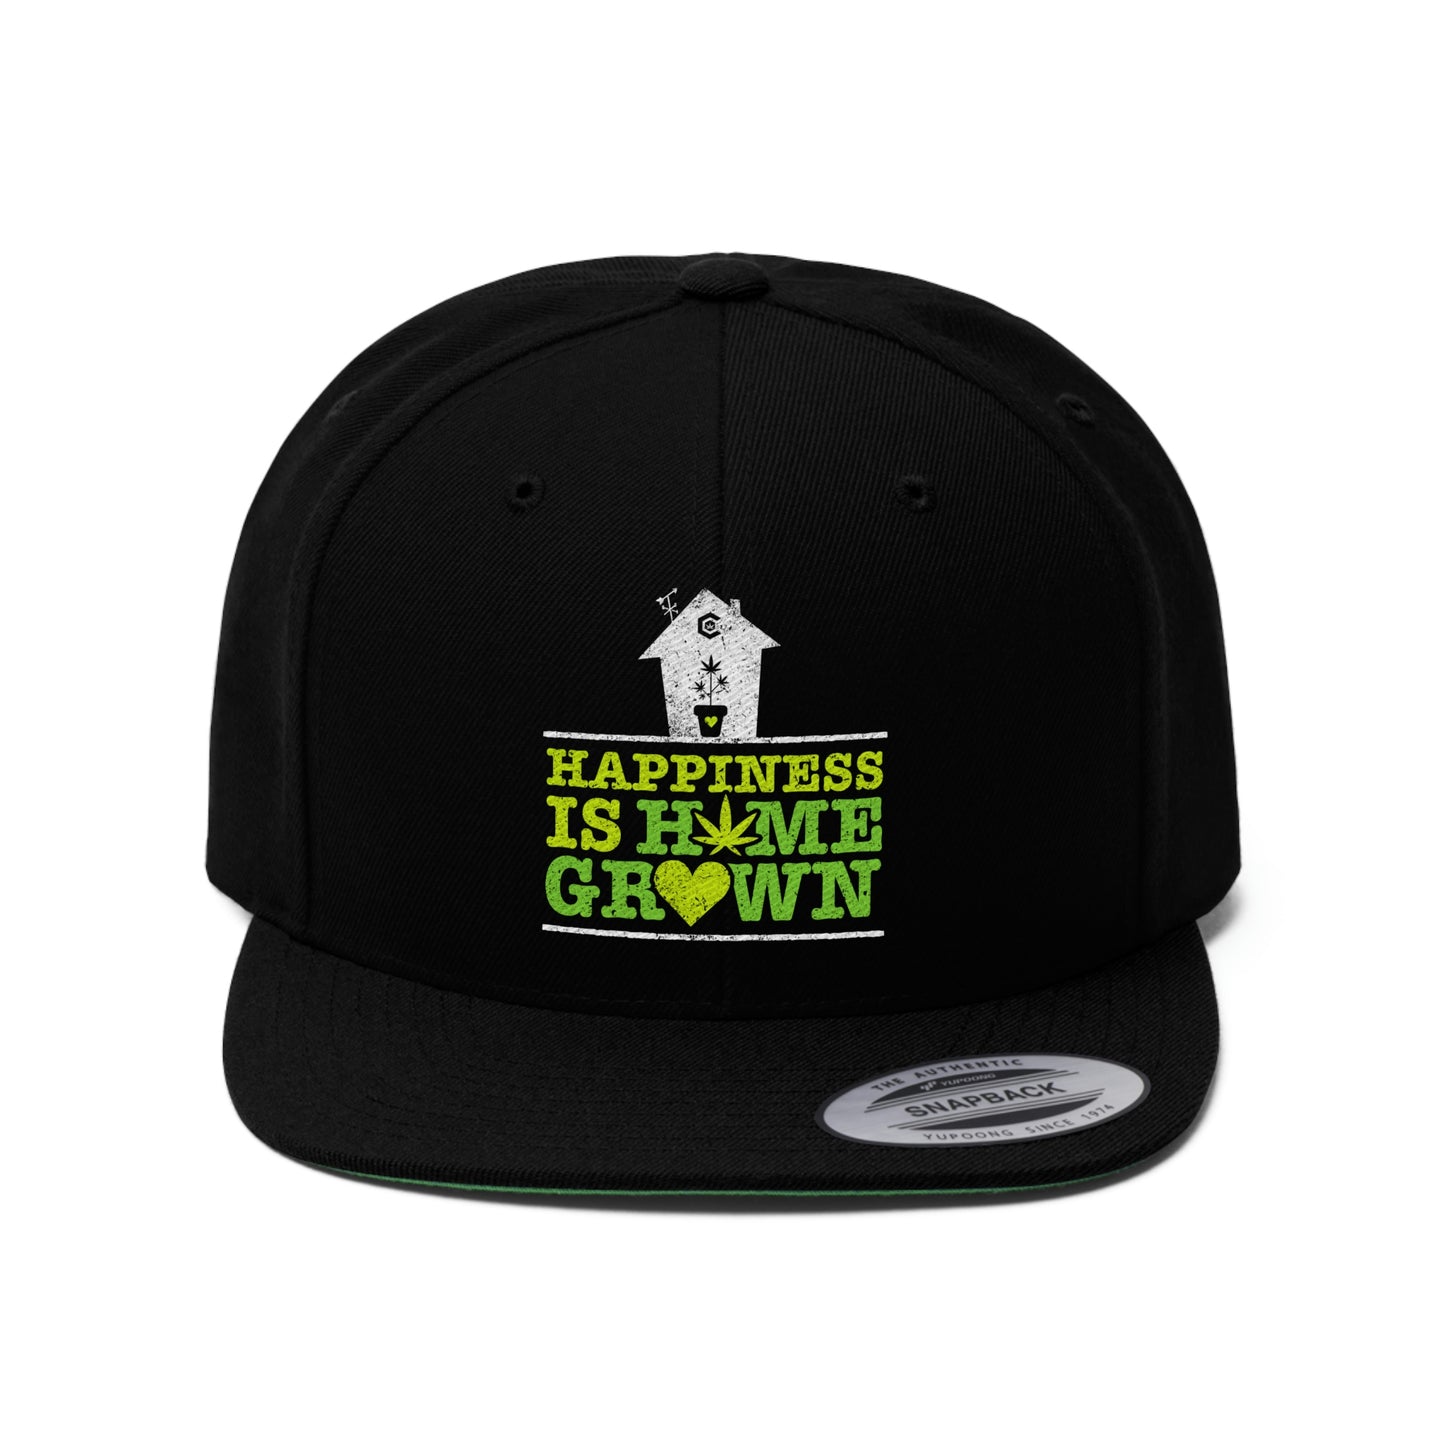 A close up of the all black Happiness Is Homegrown Marijuana Snapback Hat with white house on top of lettering